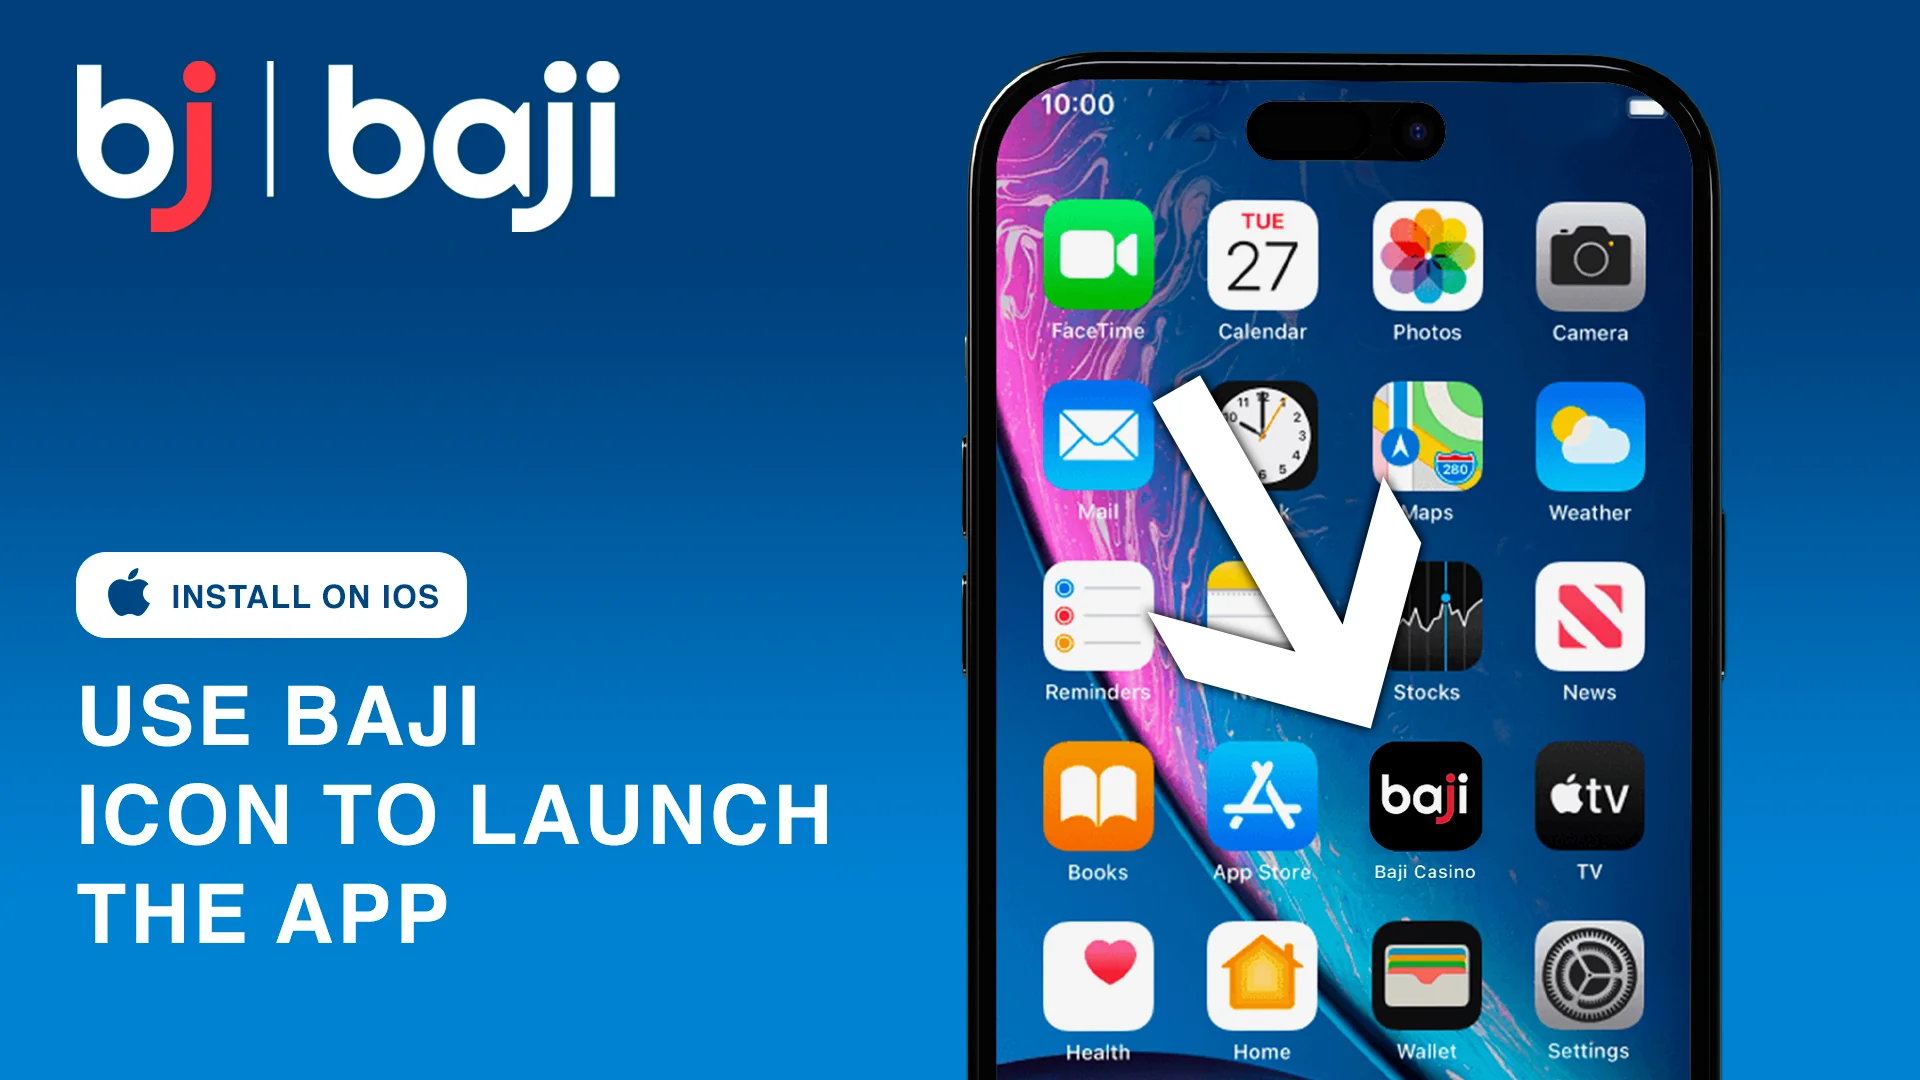 Use Baji Icon to launch installed app on iOS